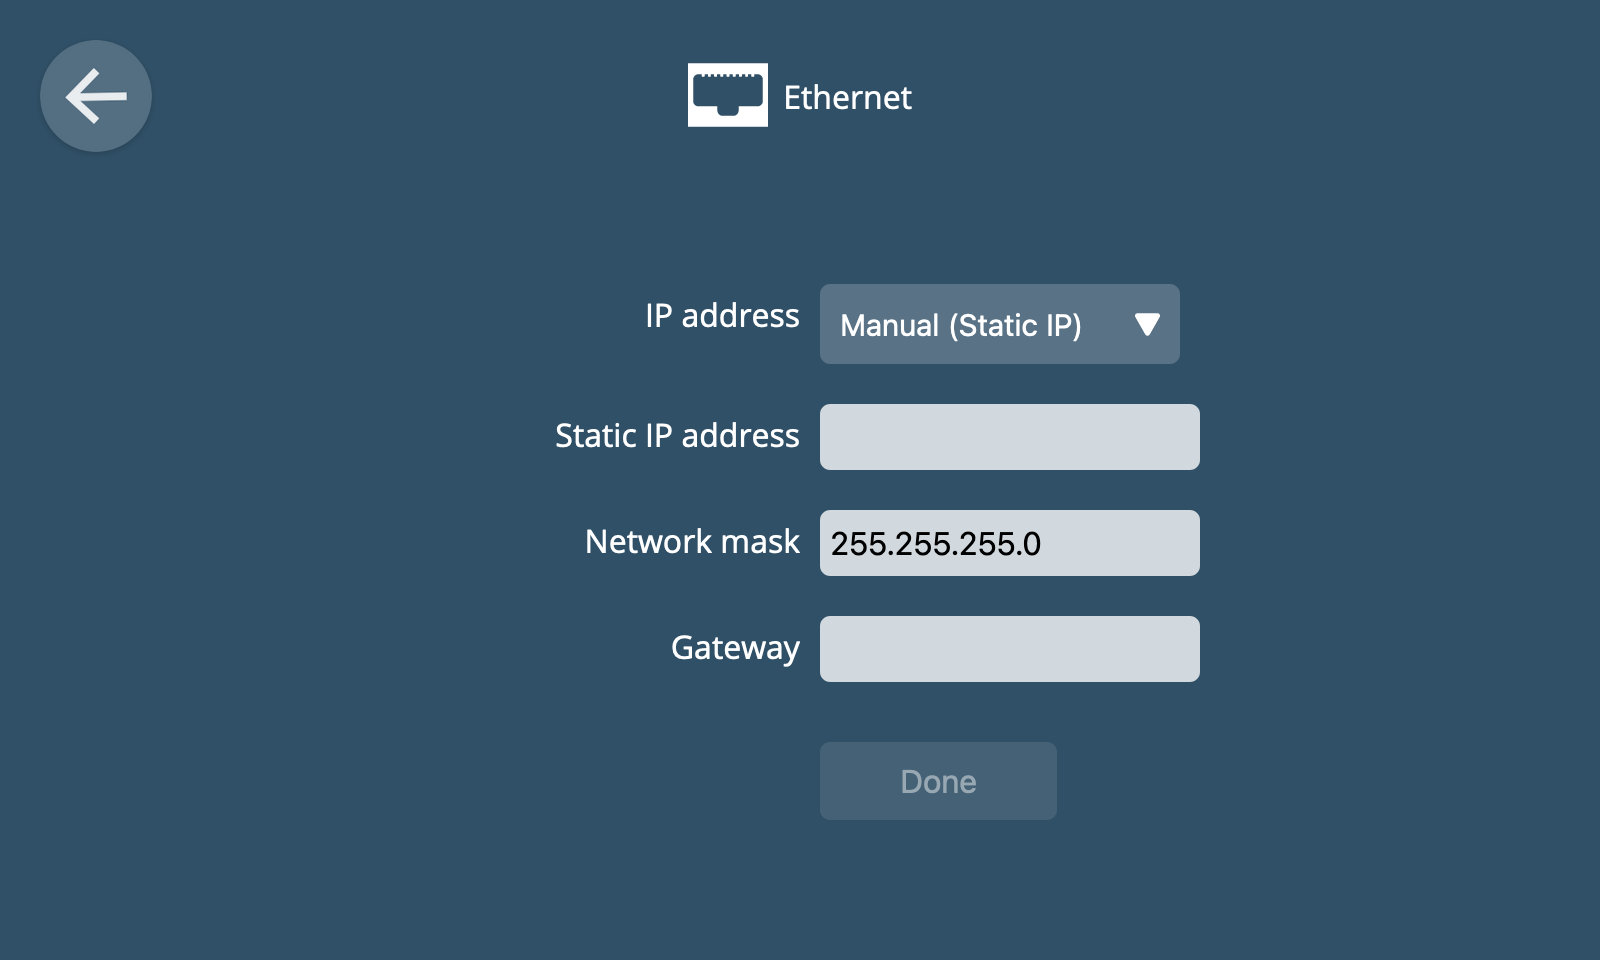 Screenshot of Ethernet settings with the manual option selected, with a form to configure a static IP address